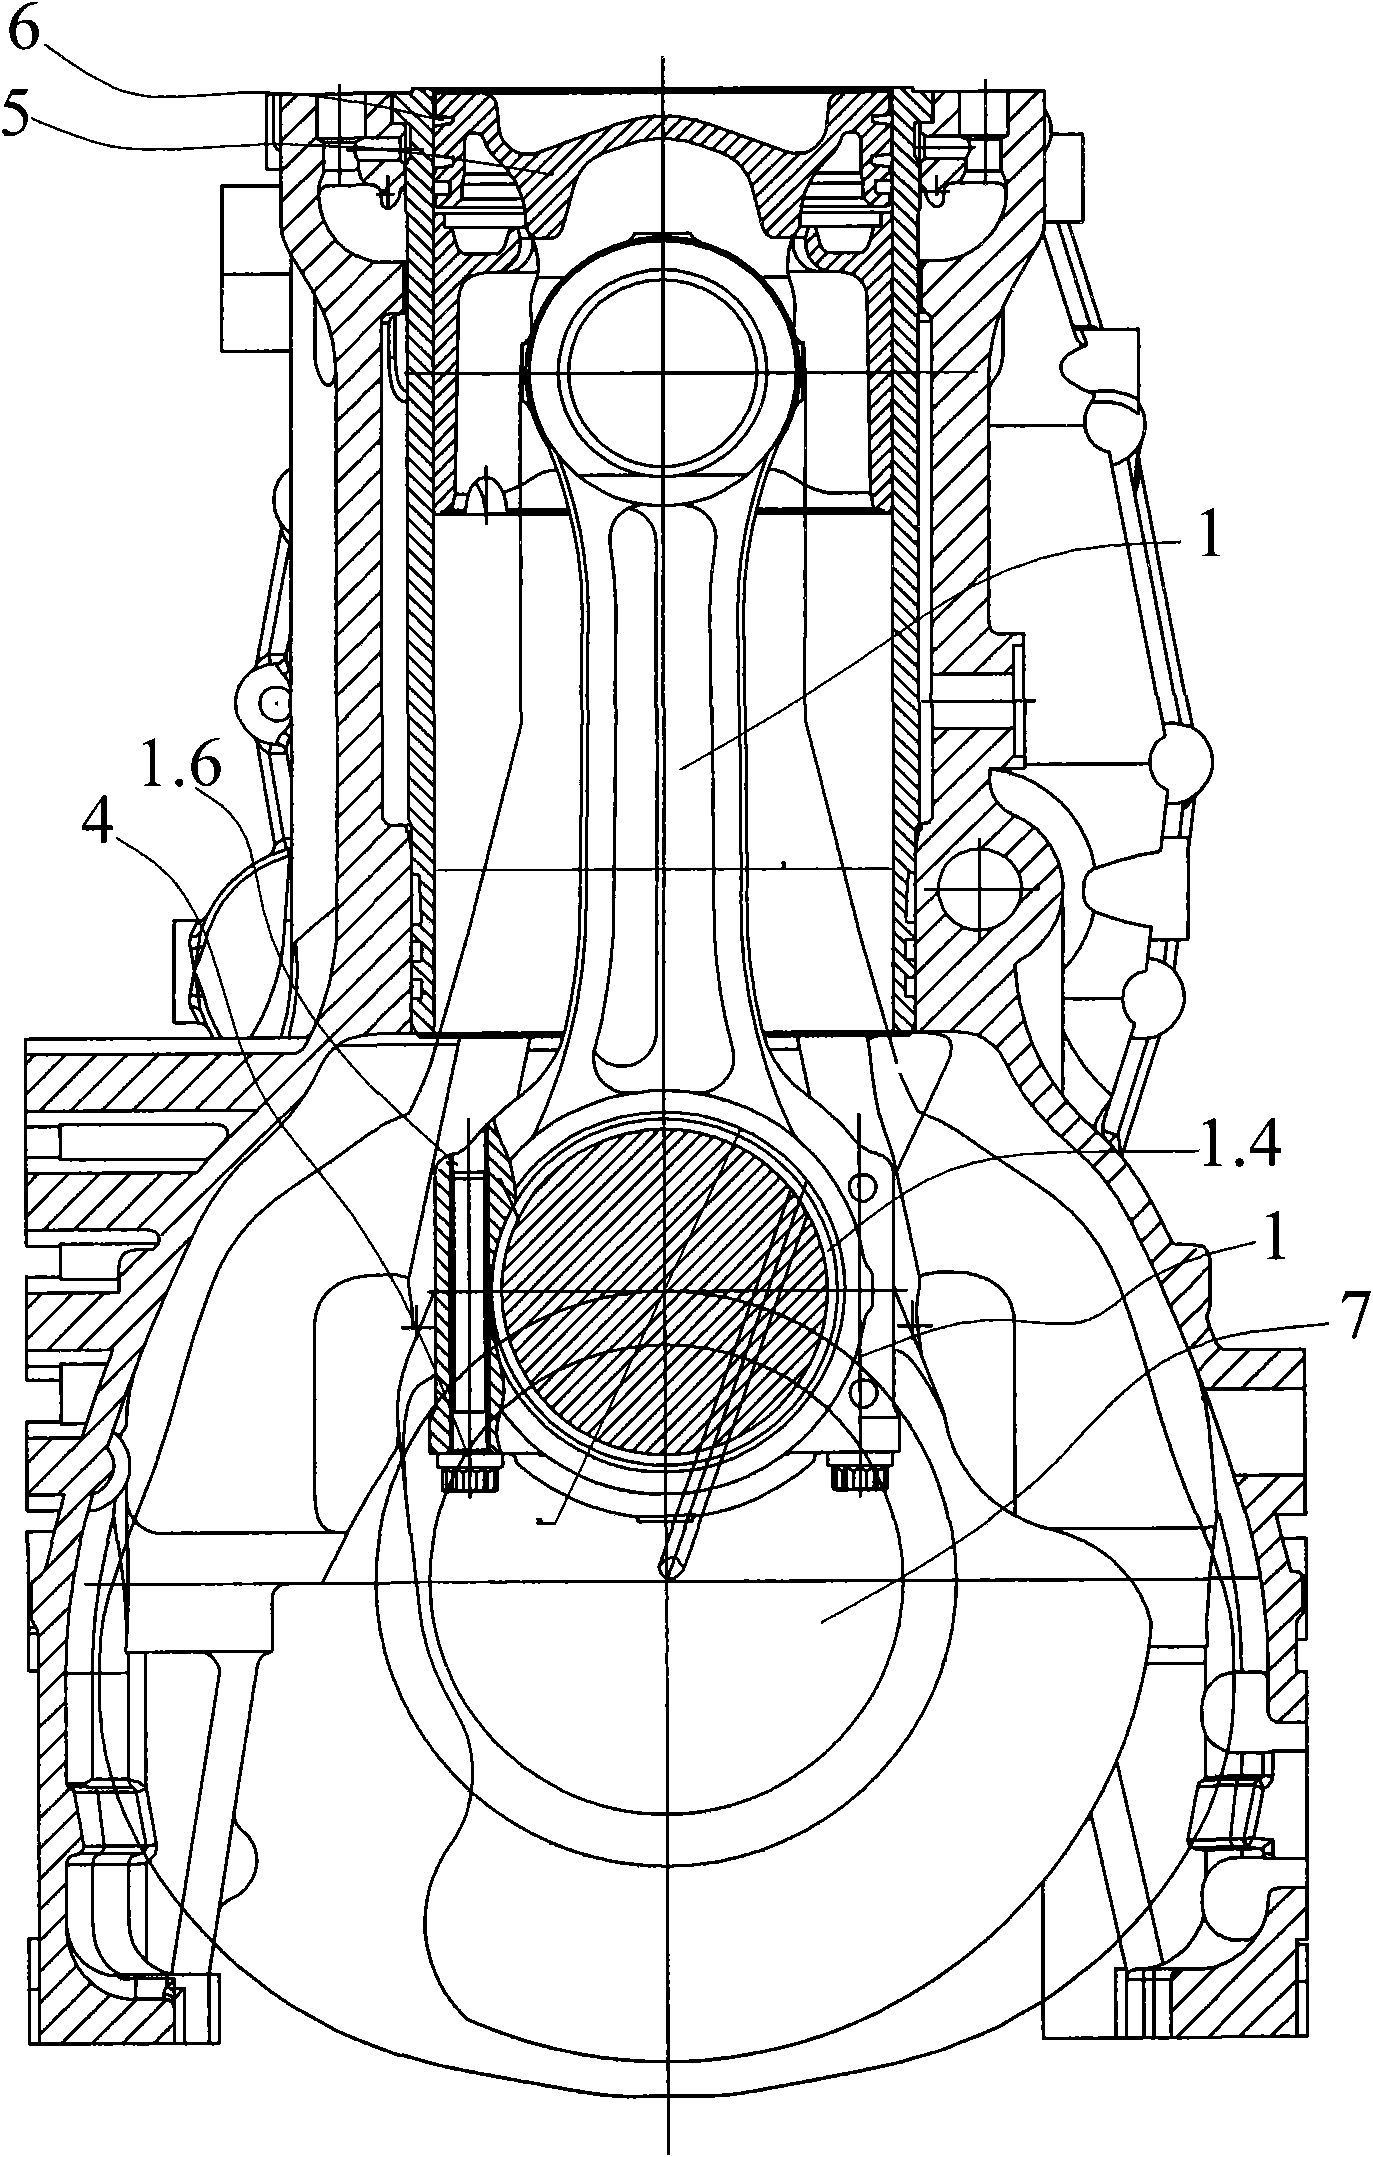 Connecting rod structure for engines